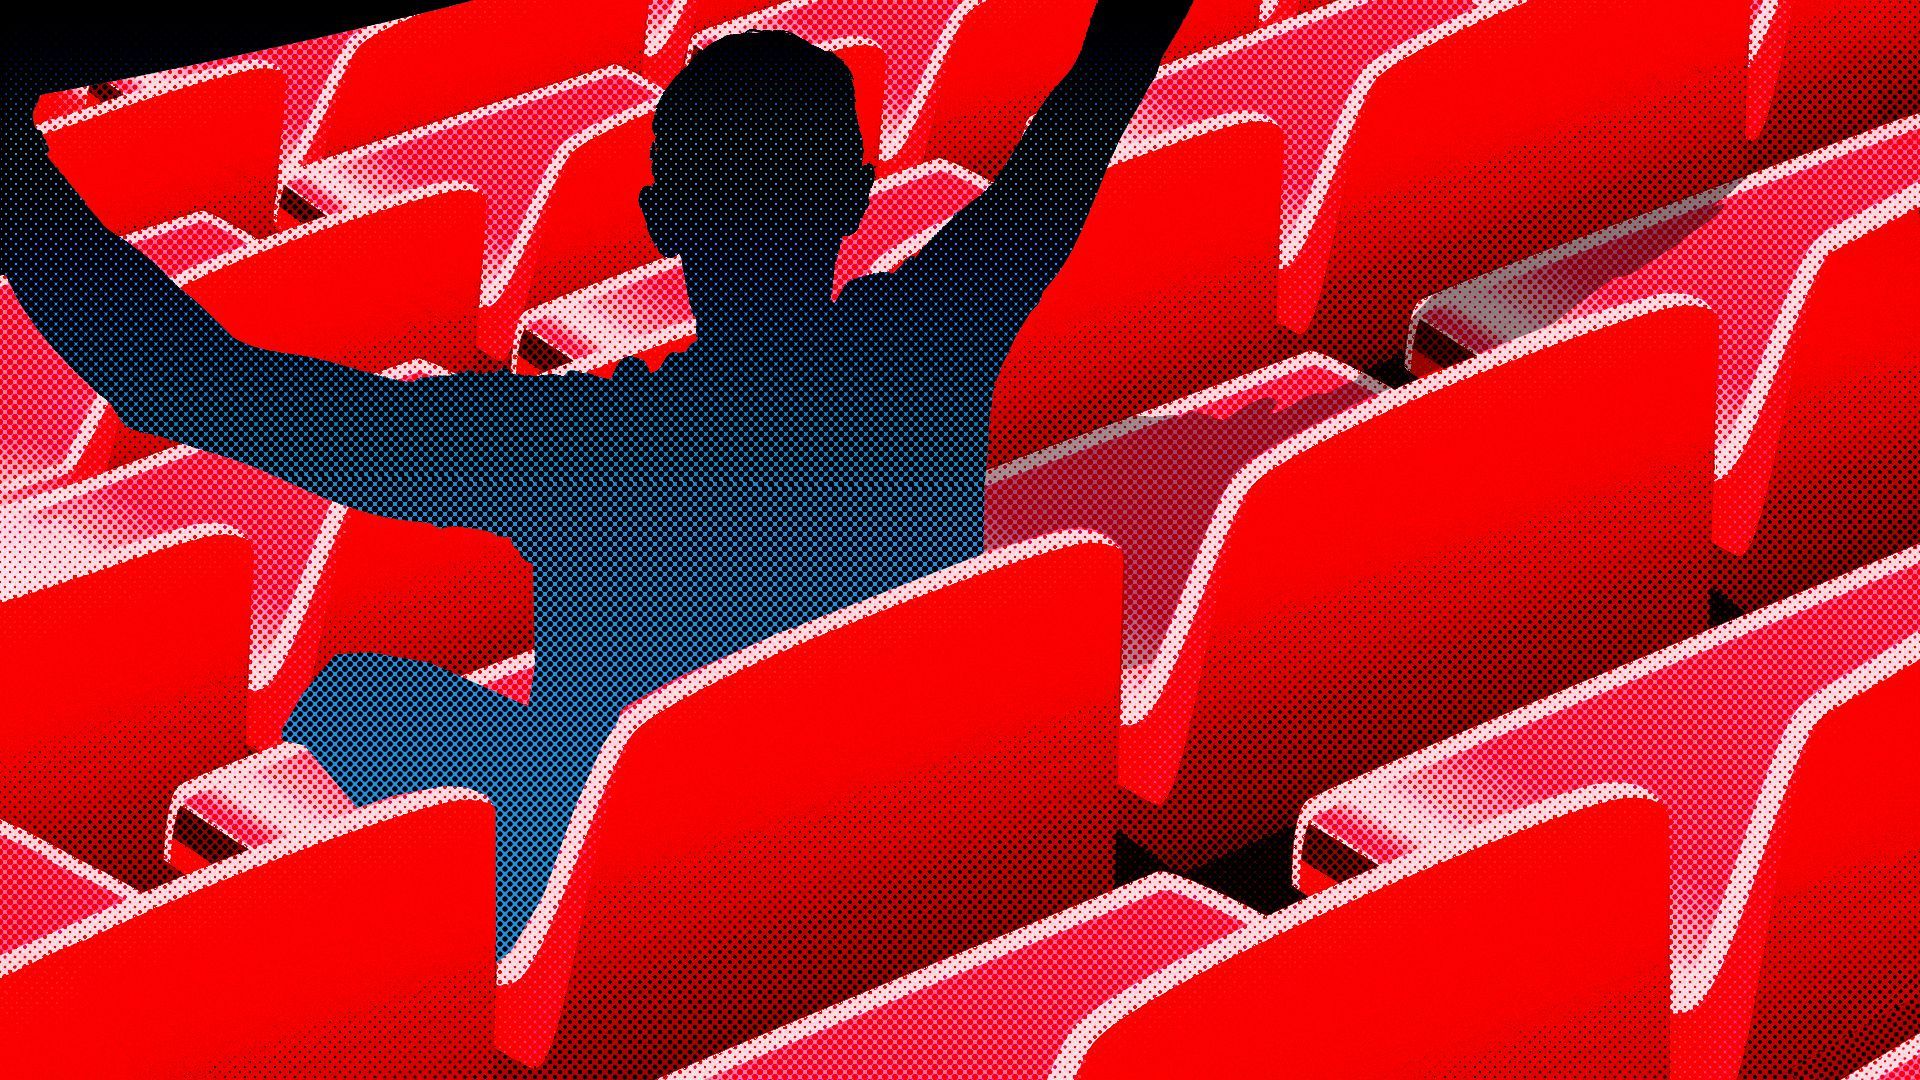 Illustration of an empty stadium filled only by the silhouette of an absent spectator.